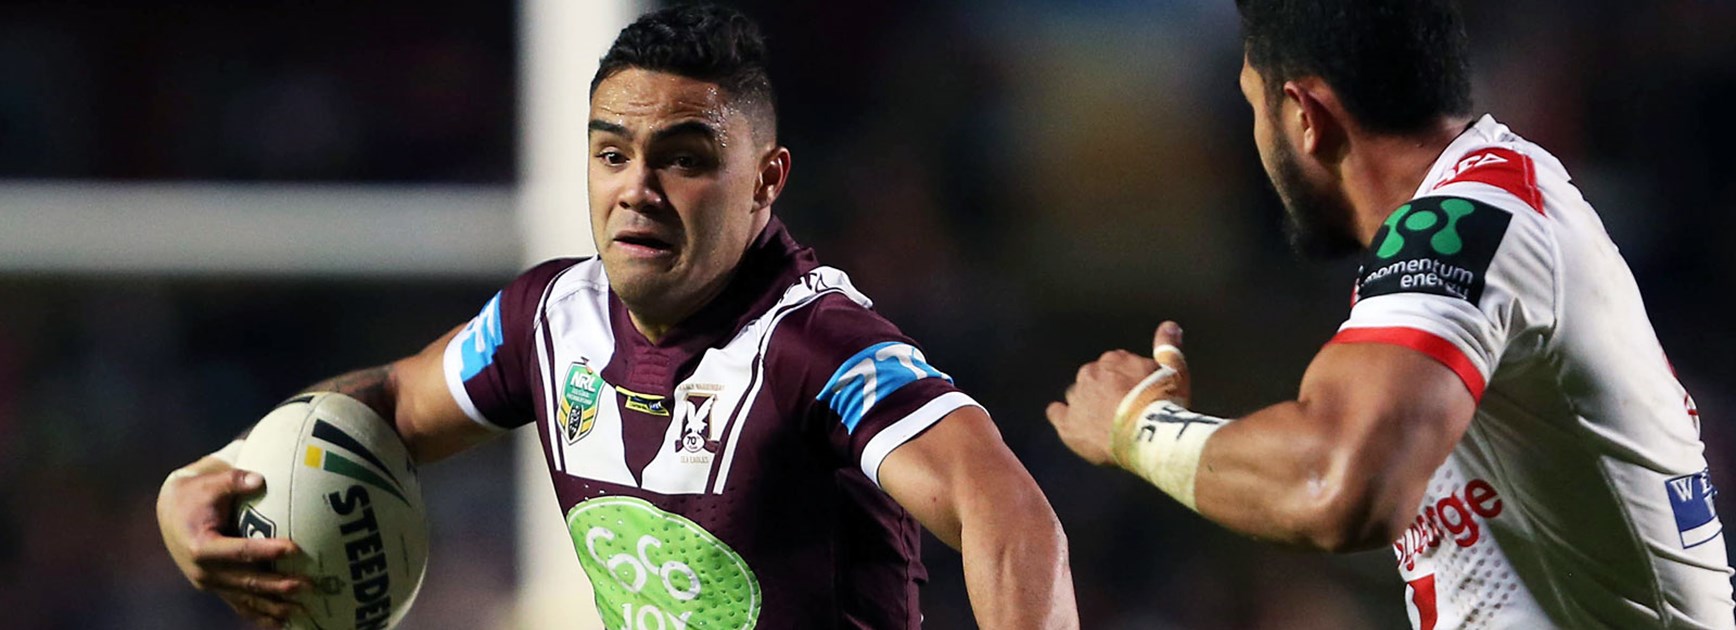 Manly centre Dylan Walker was a strong performer against the Dragons in Round 17.